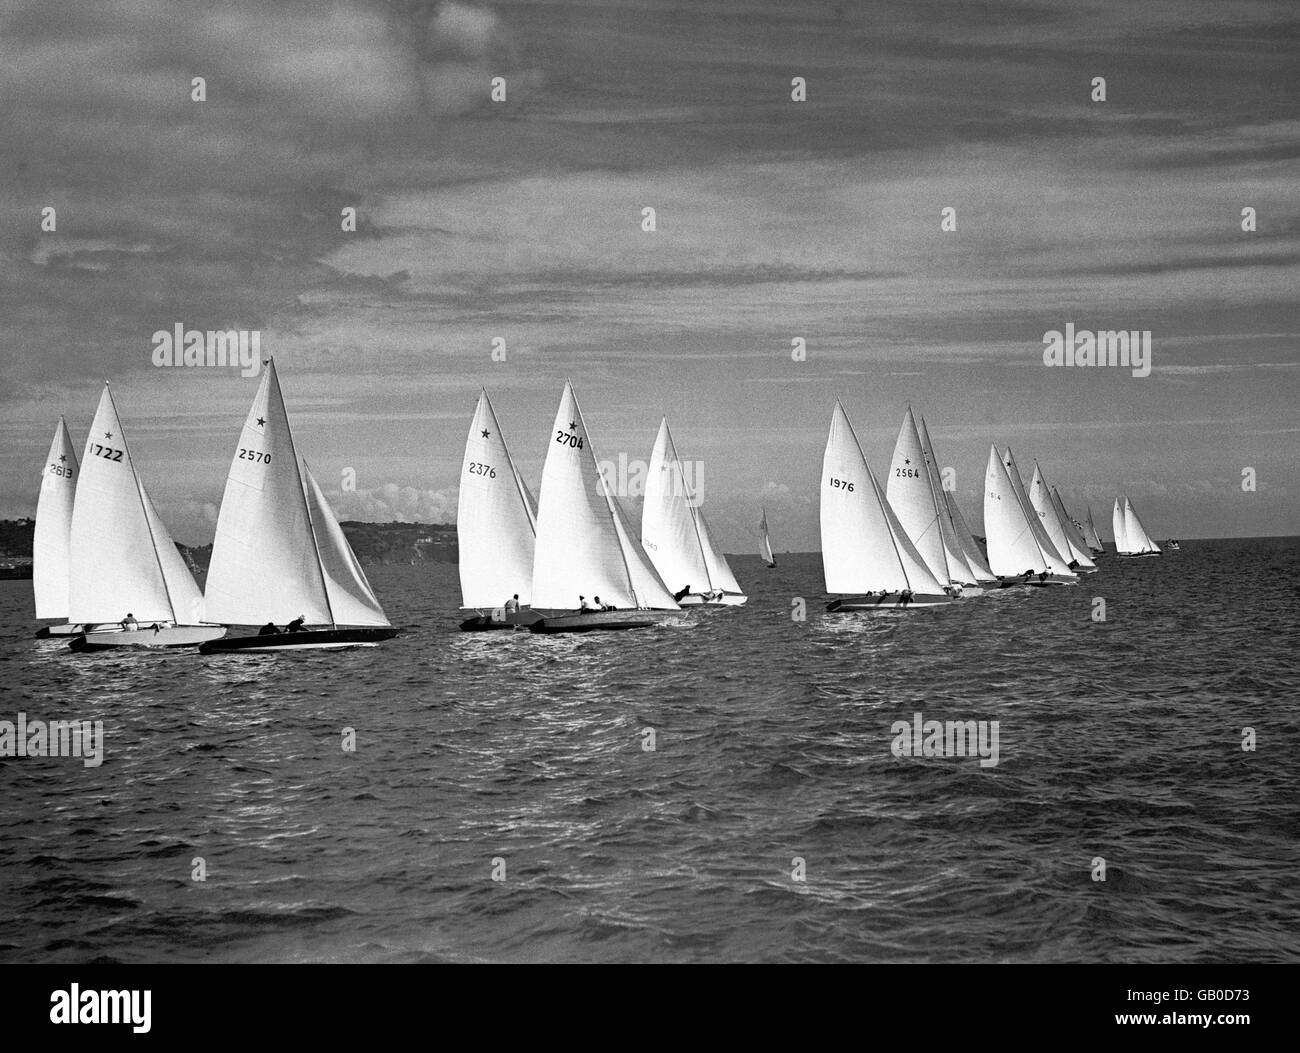 London Olympic Games 1948 - Sailing - Torbay. A Star class race in progress, yacht 1976 is Great Britain's entry 'Gem II'. Stock Photo